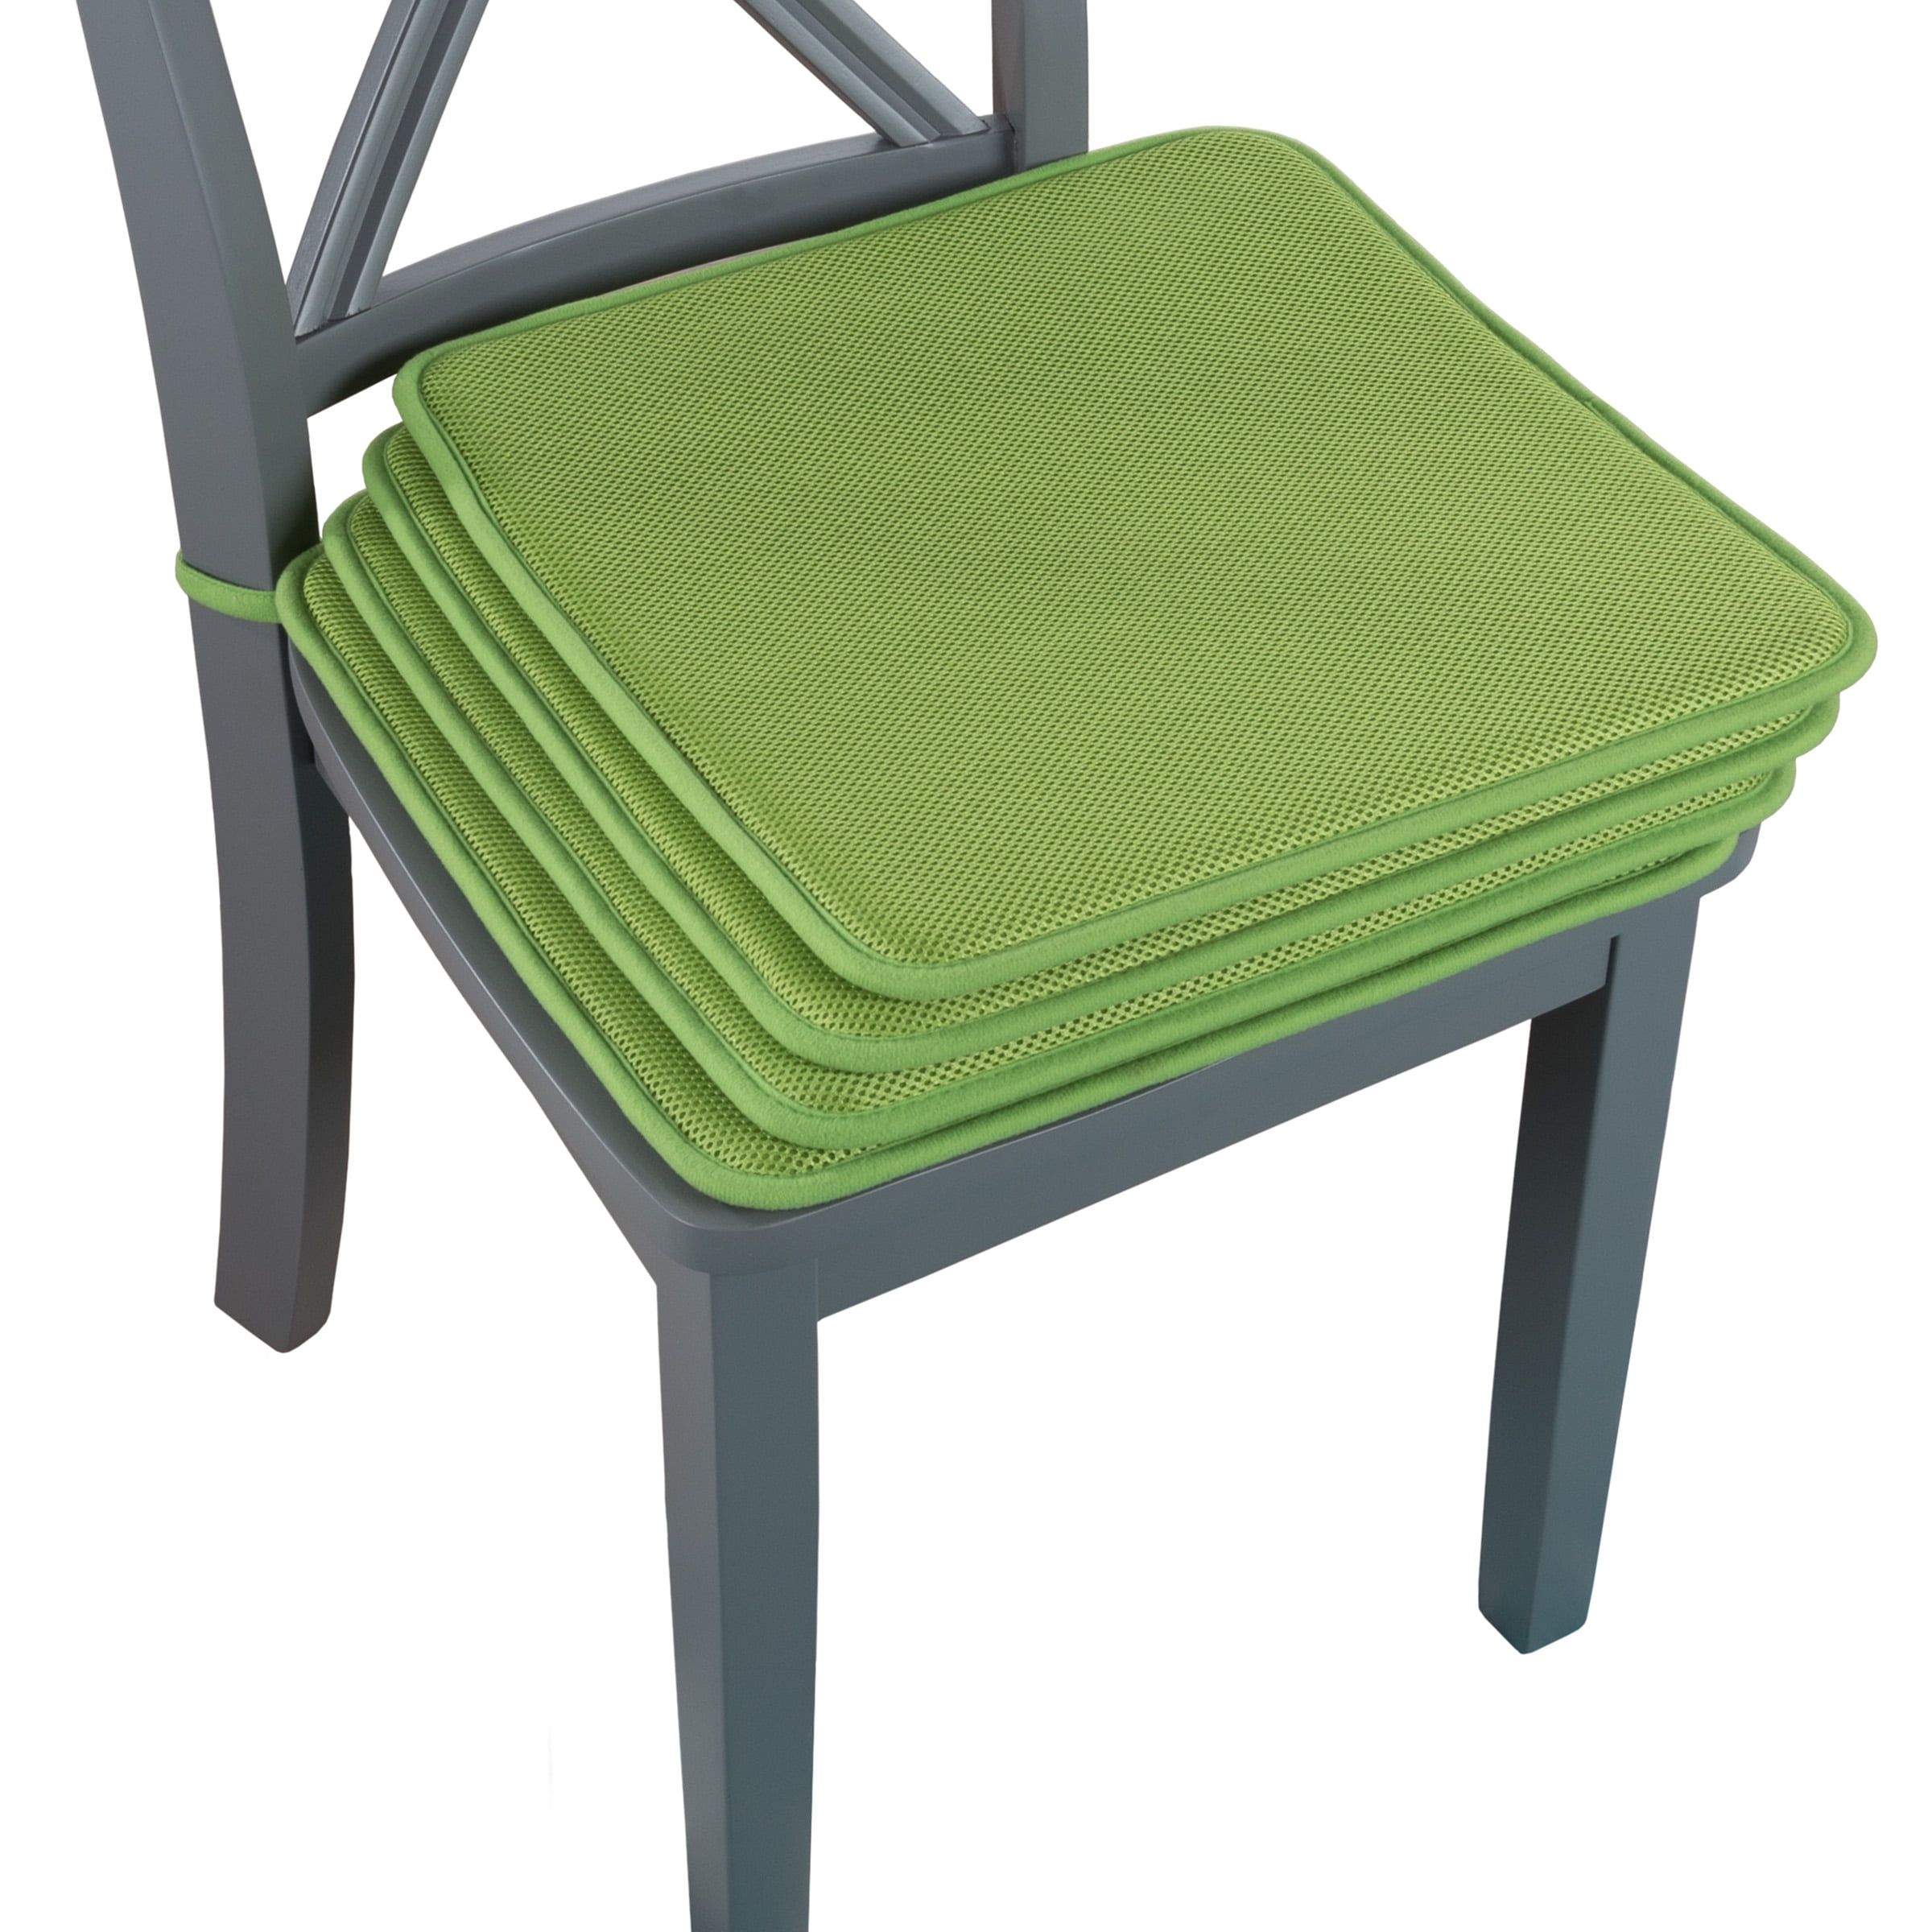 Chair Pads With Ties - VisualHunt